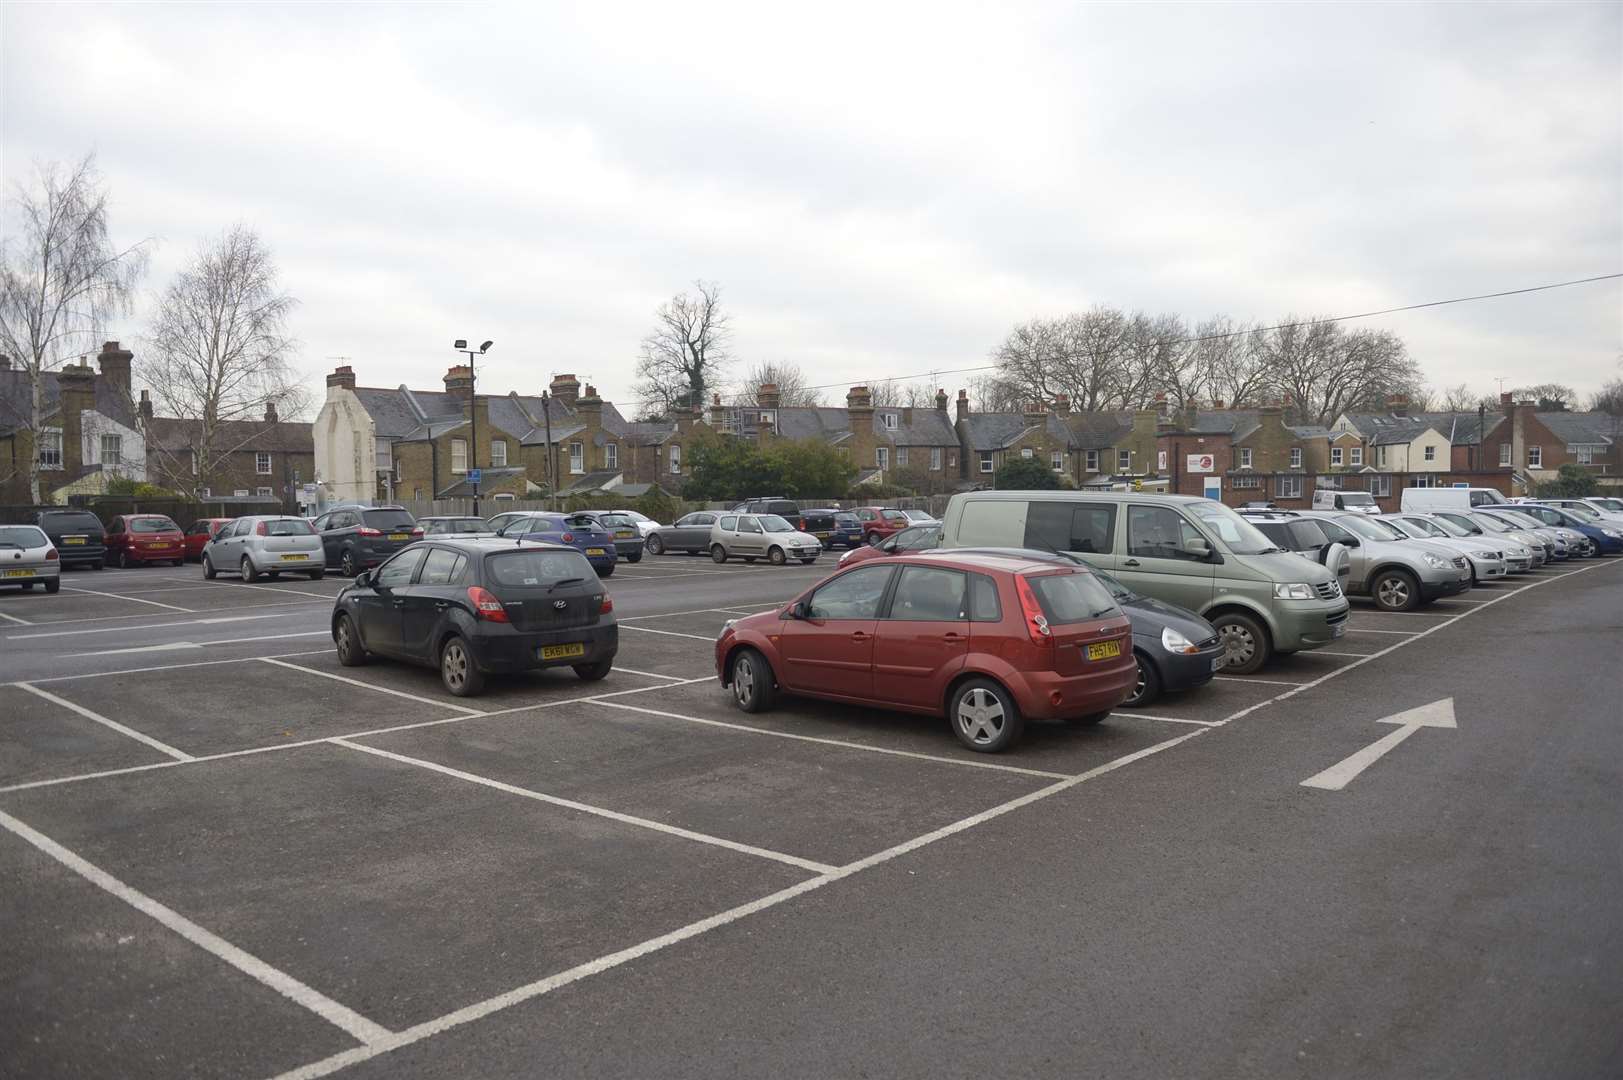 Users of Pound Lane car park will be met with a price increase from April 1